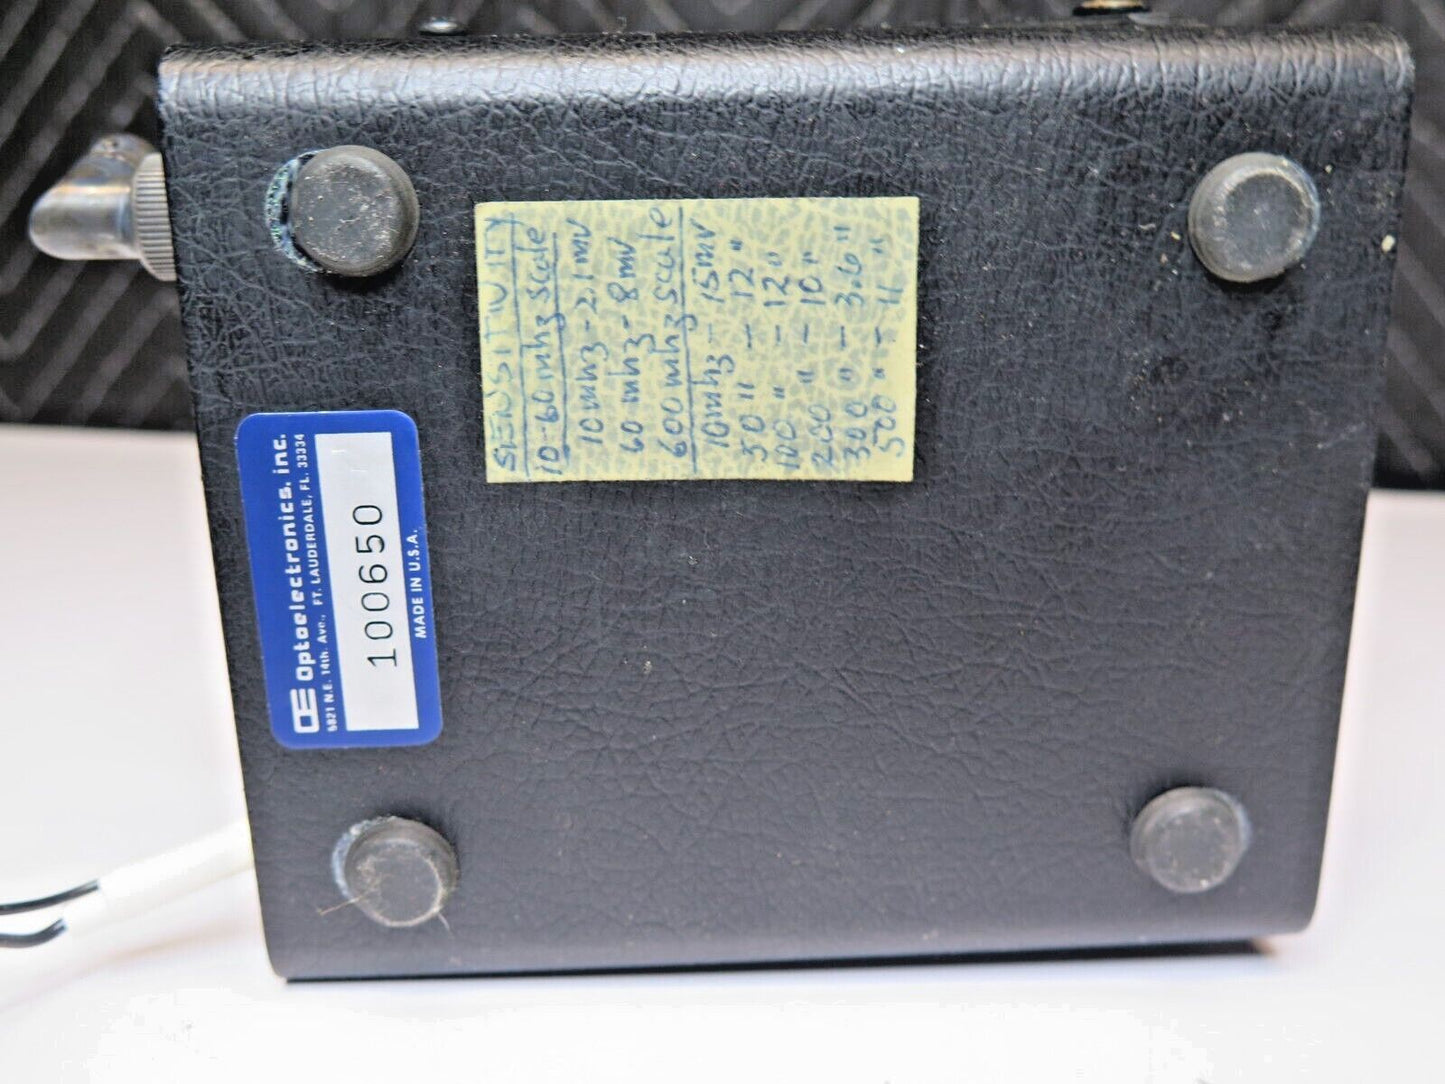 Optoelectronics Frequency Counter Model 7010A - 600 MHz